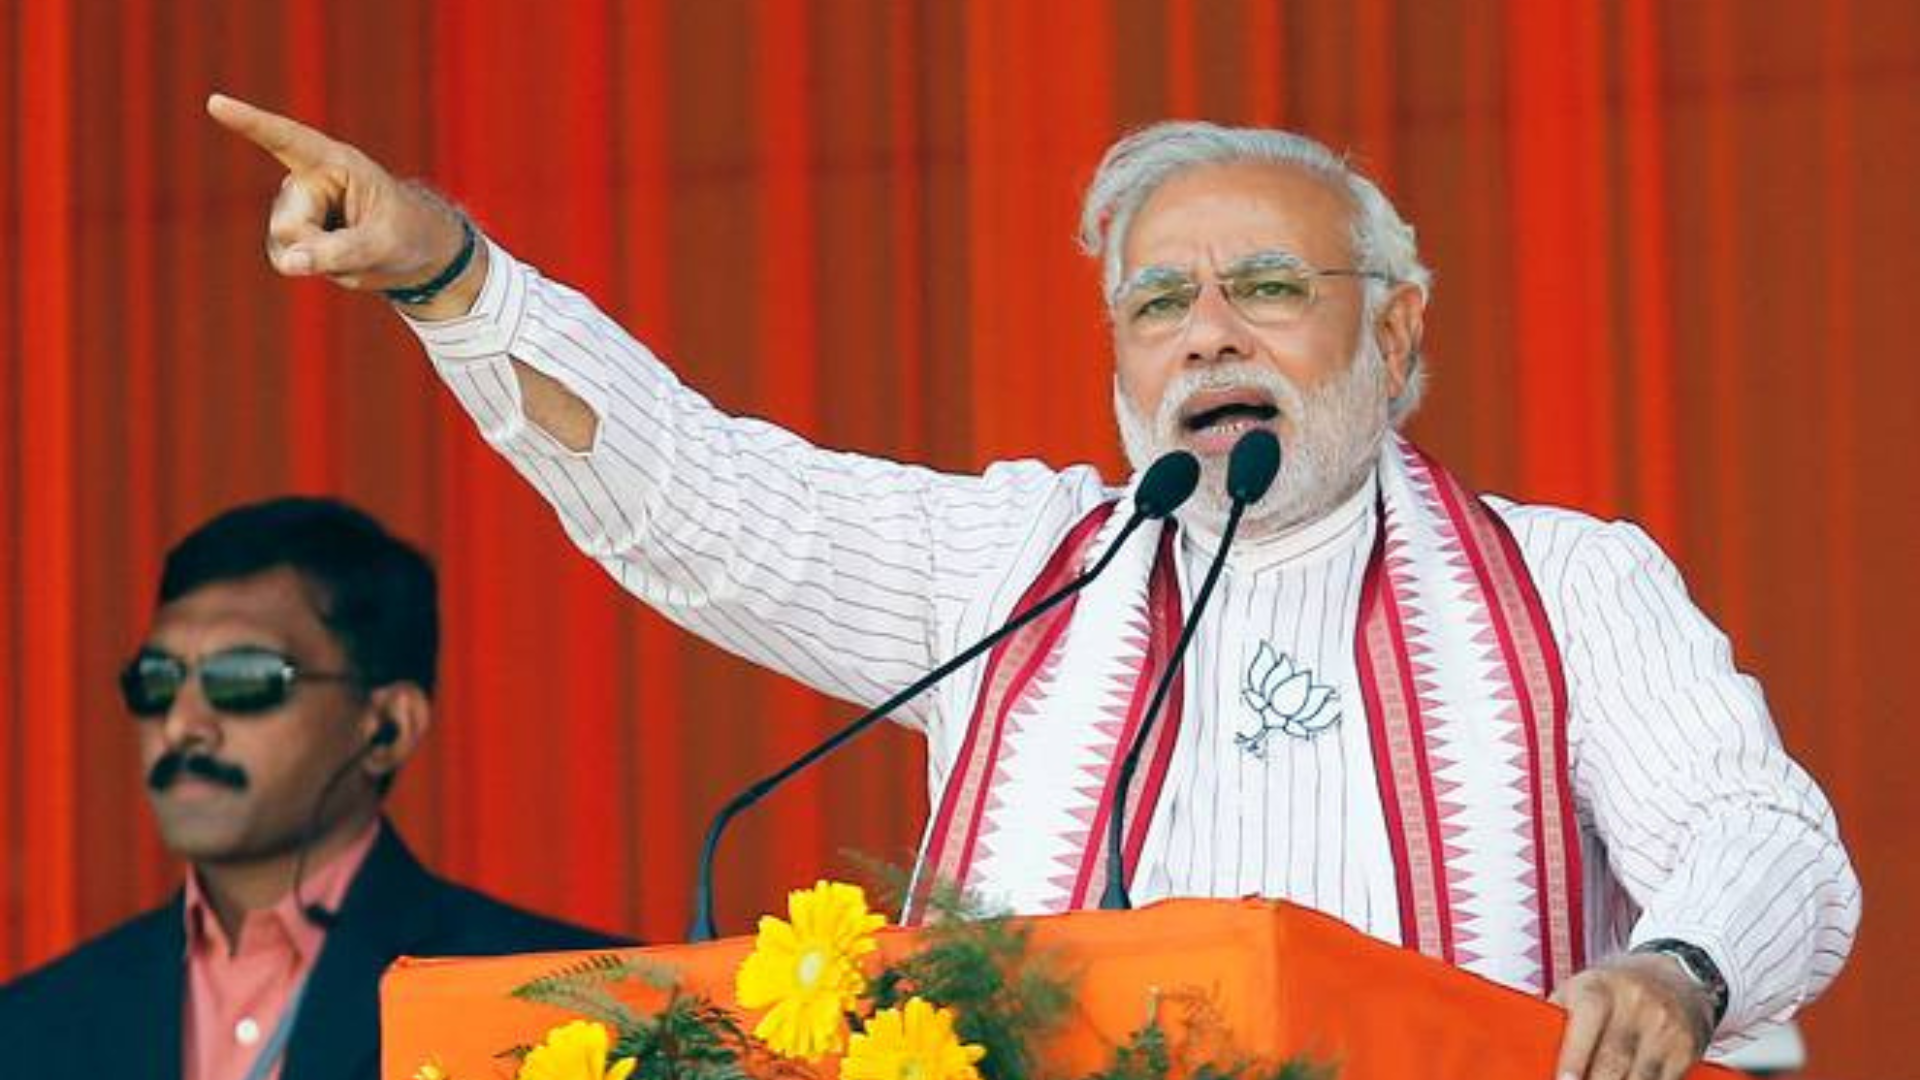 Prime Minister Modi Scheduled to Speak at Rally in Churu, Rajasthan Today